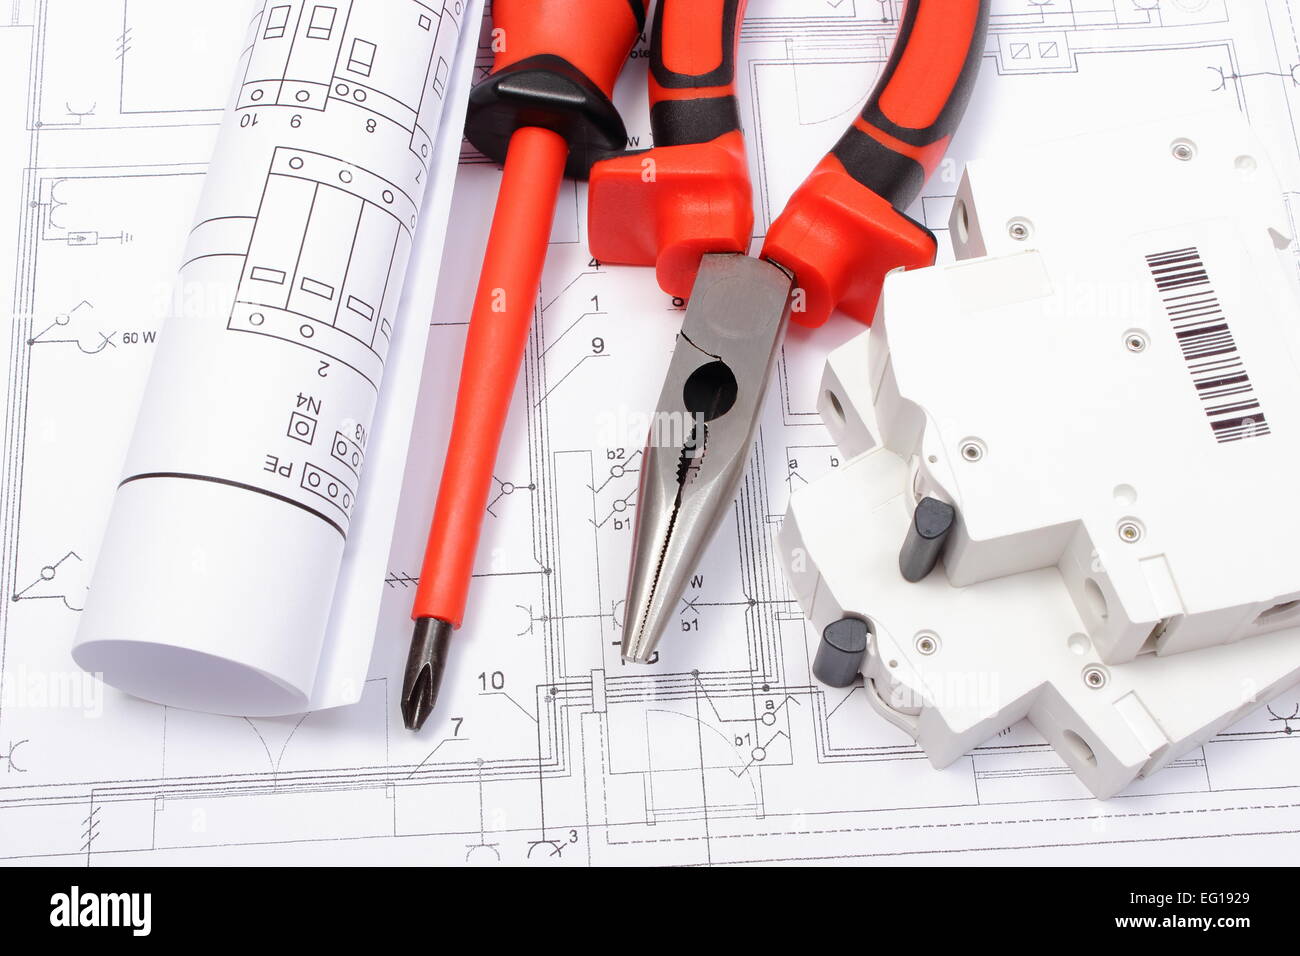 Rolled electrical diagrams, electric fuse and work tools lying on construction drawing of house, Stock Photo